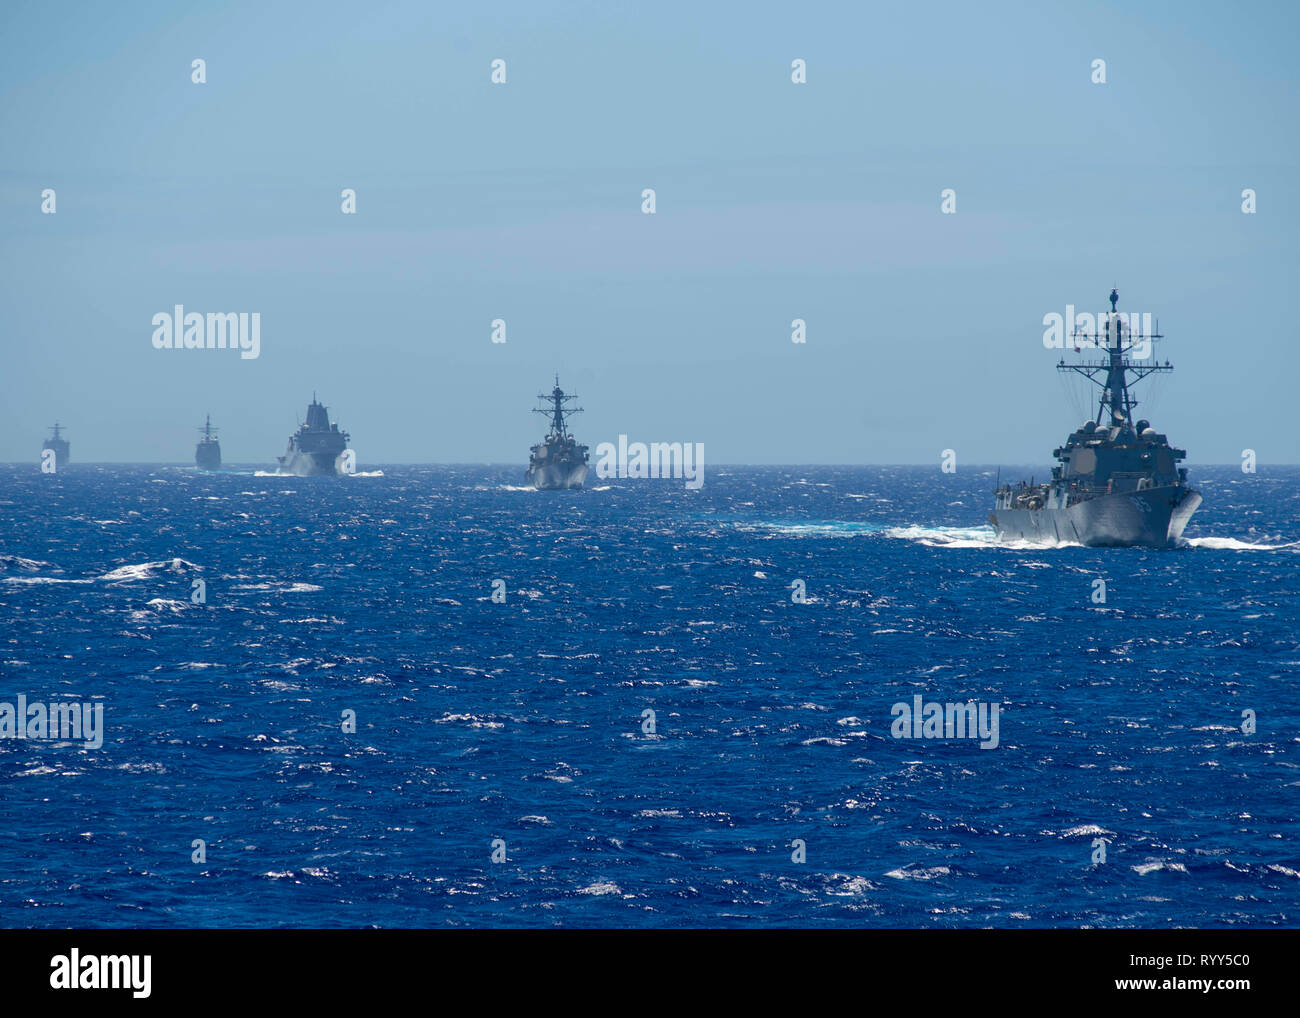 190314-N-WK982-2013 PHILIPPINE SEA (March 14, 2019) The Arleigh Burke-class guided-missile destroyer USS McCampbell (DDG 85), the Arleigh Burke-class guided-missile destroyer USS Milius (DDG 69), the amphibious transport dock ship USS Green Bay (LPD 20), the Ticonderoga-class guided-missile cruiser USS Chancellorsville (CG 62), and the amphibious dock landing ship USS Ashland (LSD 48) maneuver while operating in the Philippine Sea. U.S. Navy warships train together to increase the tactical proficiency, lethality, and interoperability of participating units in an Era of Great Power Competition. Stock Photo